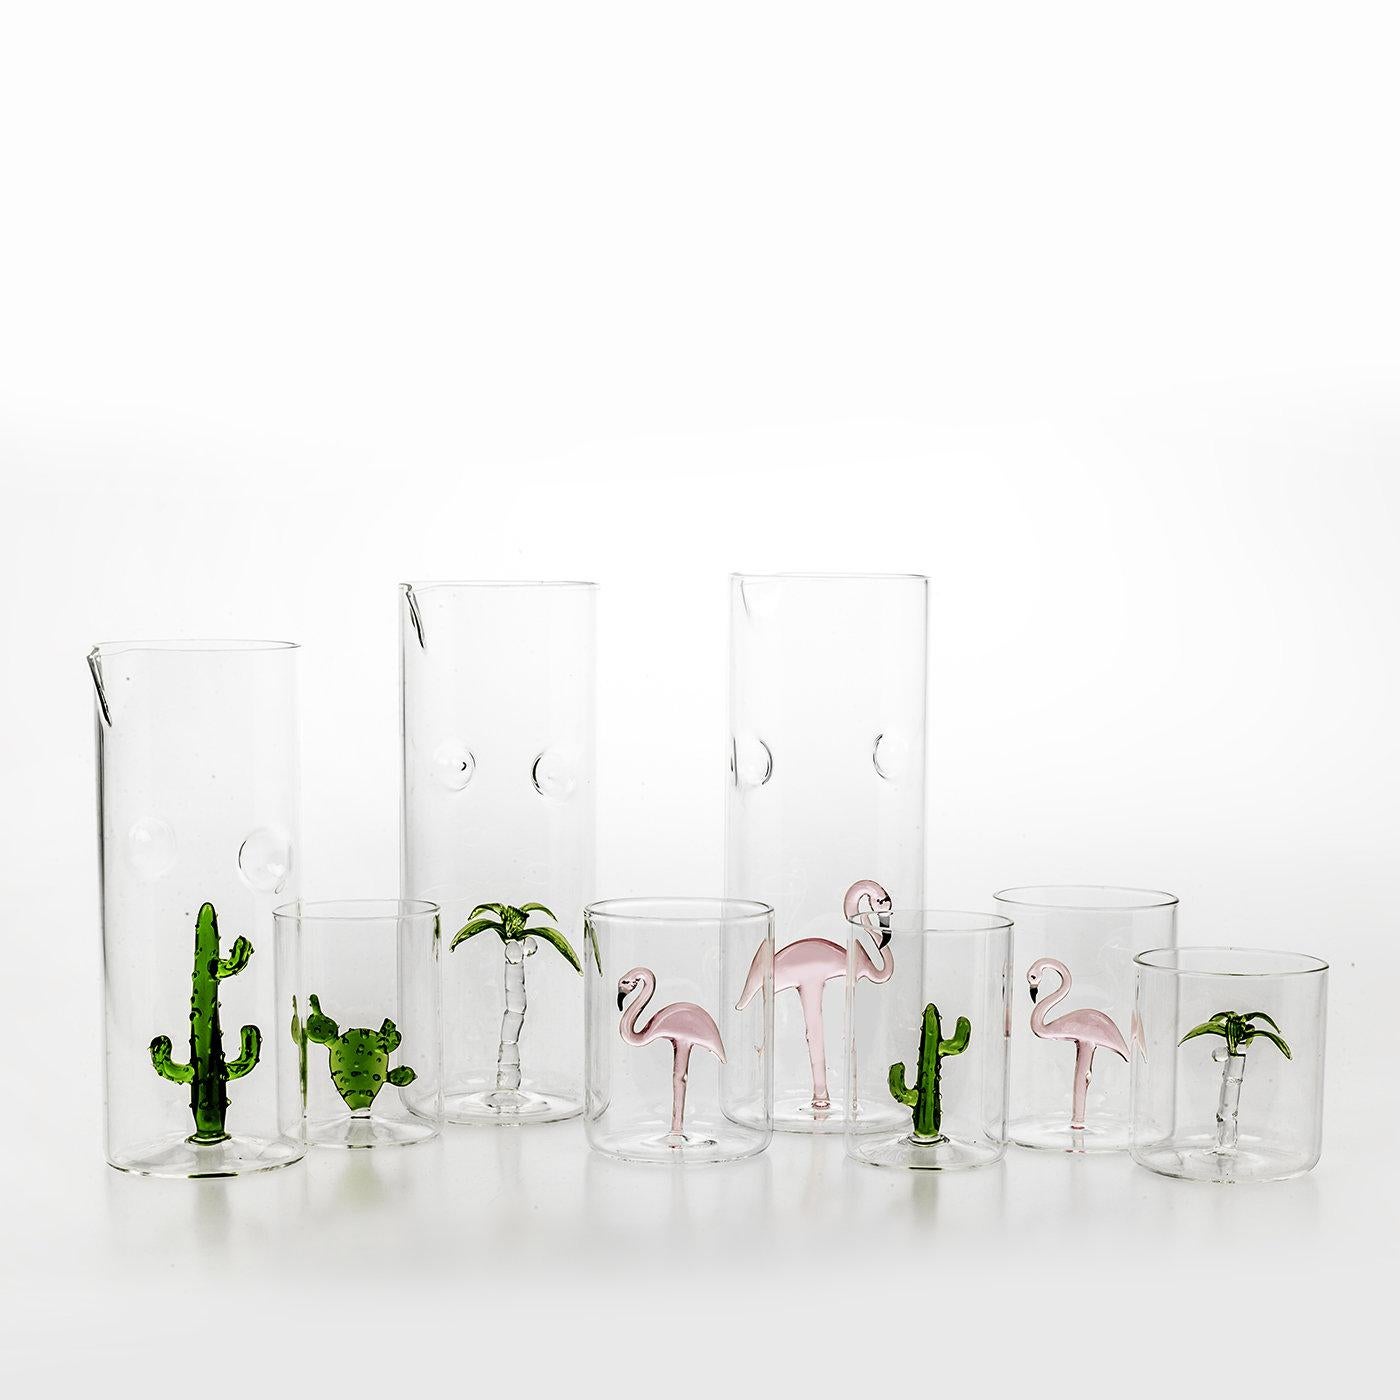 Part of a collection inspired by tropical destinations and the majesty of untouched nature, this set of four glasses is handcrafted of clear glass. Each glass contains a sculpture in the shape of a free-standing palm tree with a hand-painted top in